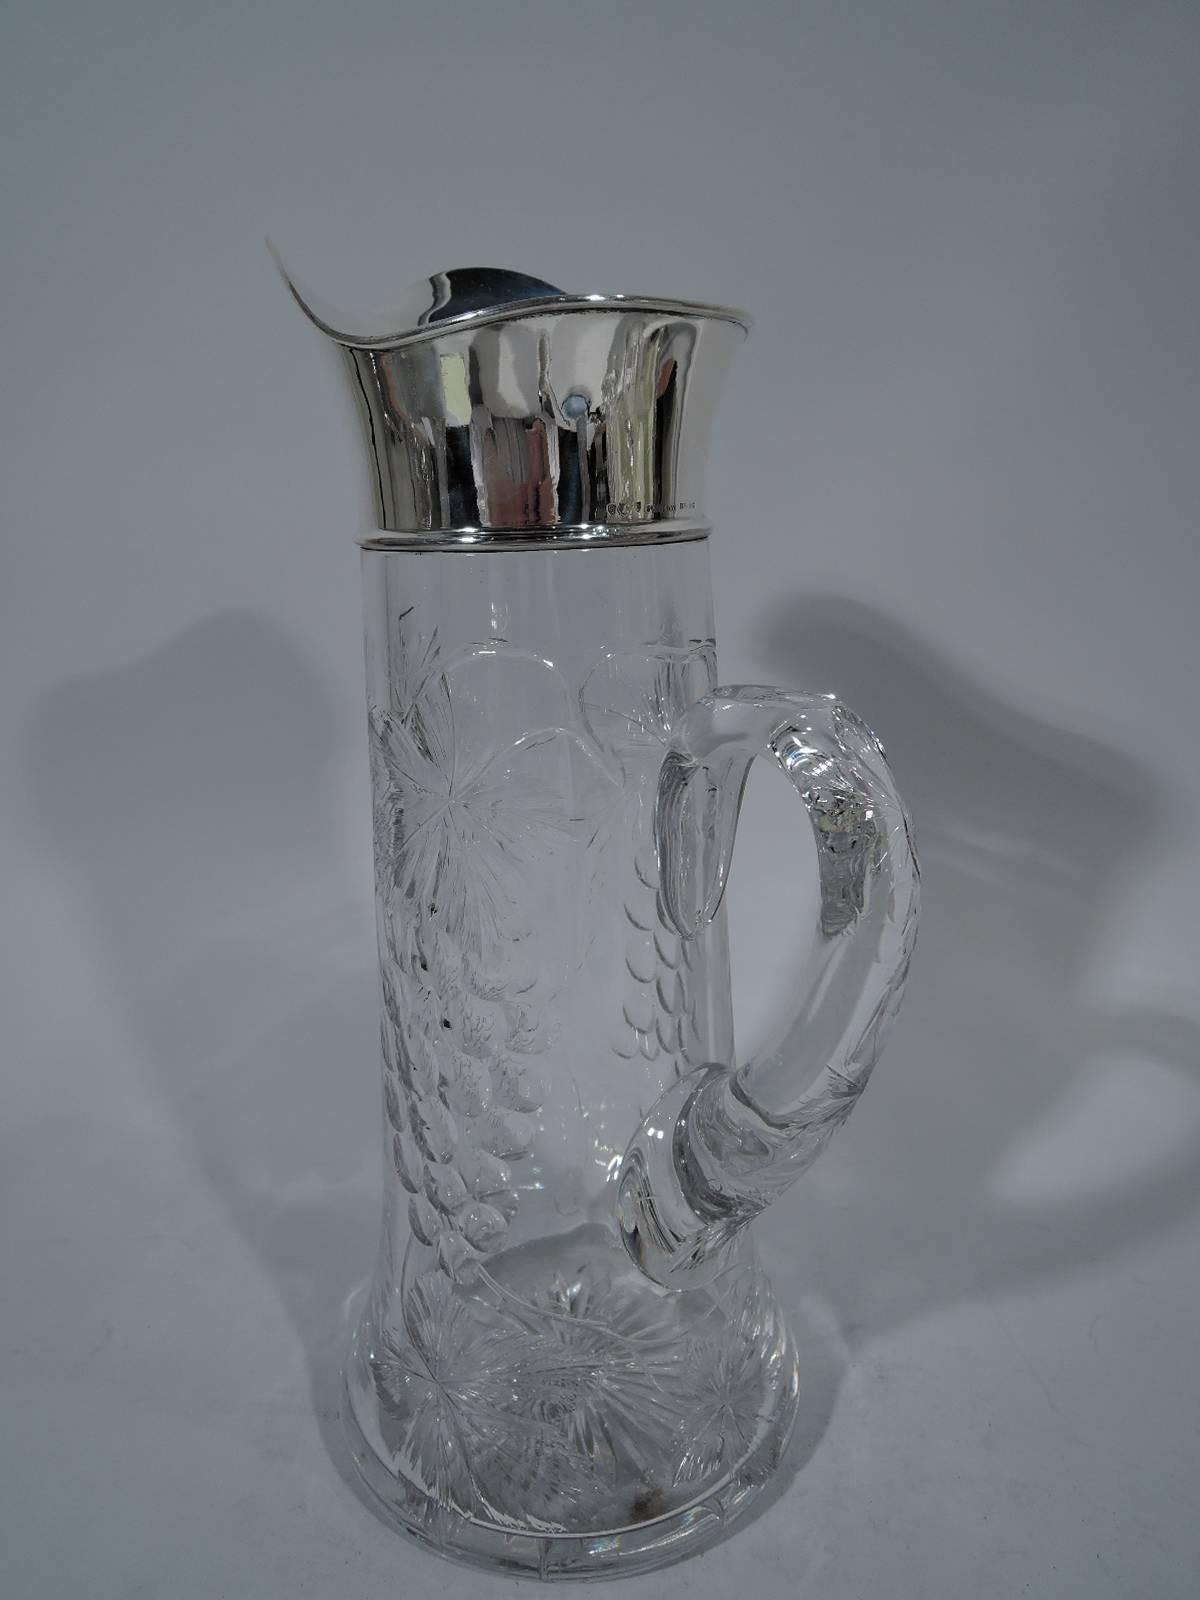 Glass claret jug with sterling silver collar. Made by Shreve & Co. in San Francisco, circa 1910. Cylindrical with spread base and scroll handle. Fruiting grapevine with big leaves and succulent fruit bunches cut to body and handle. Glass clear to